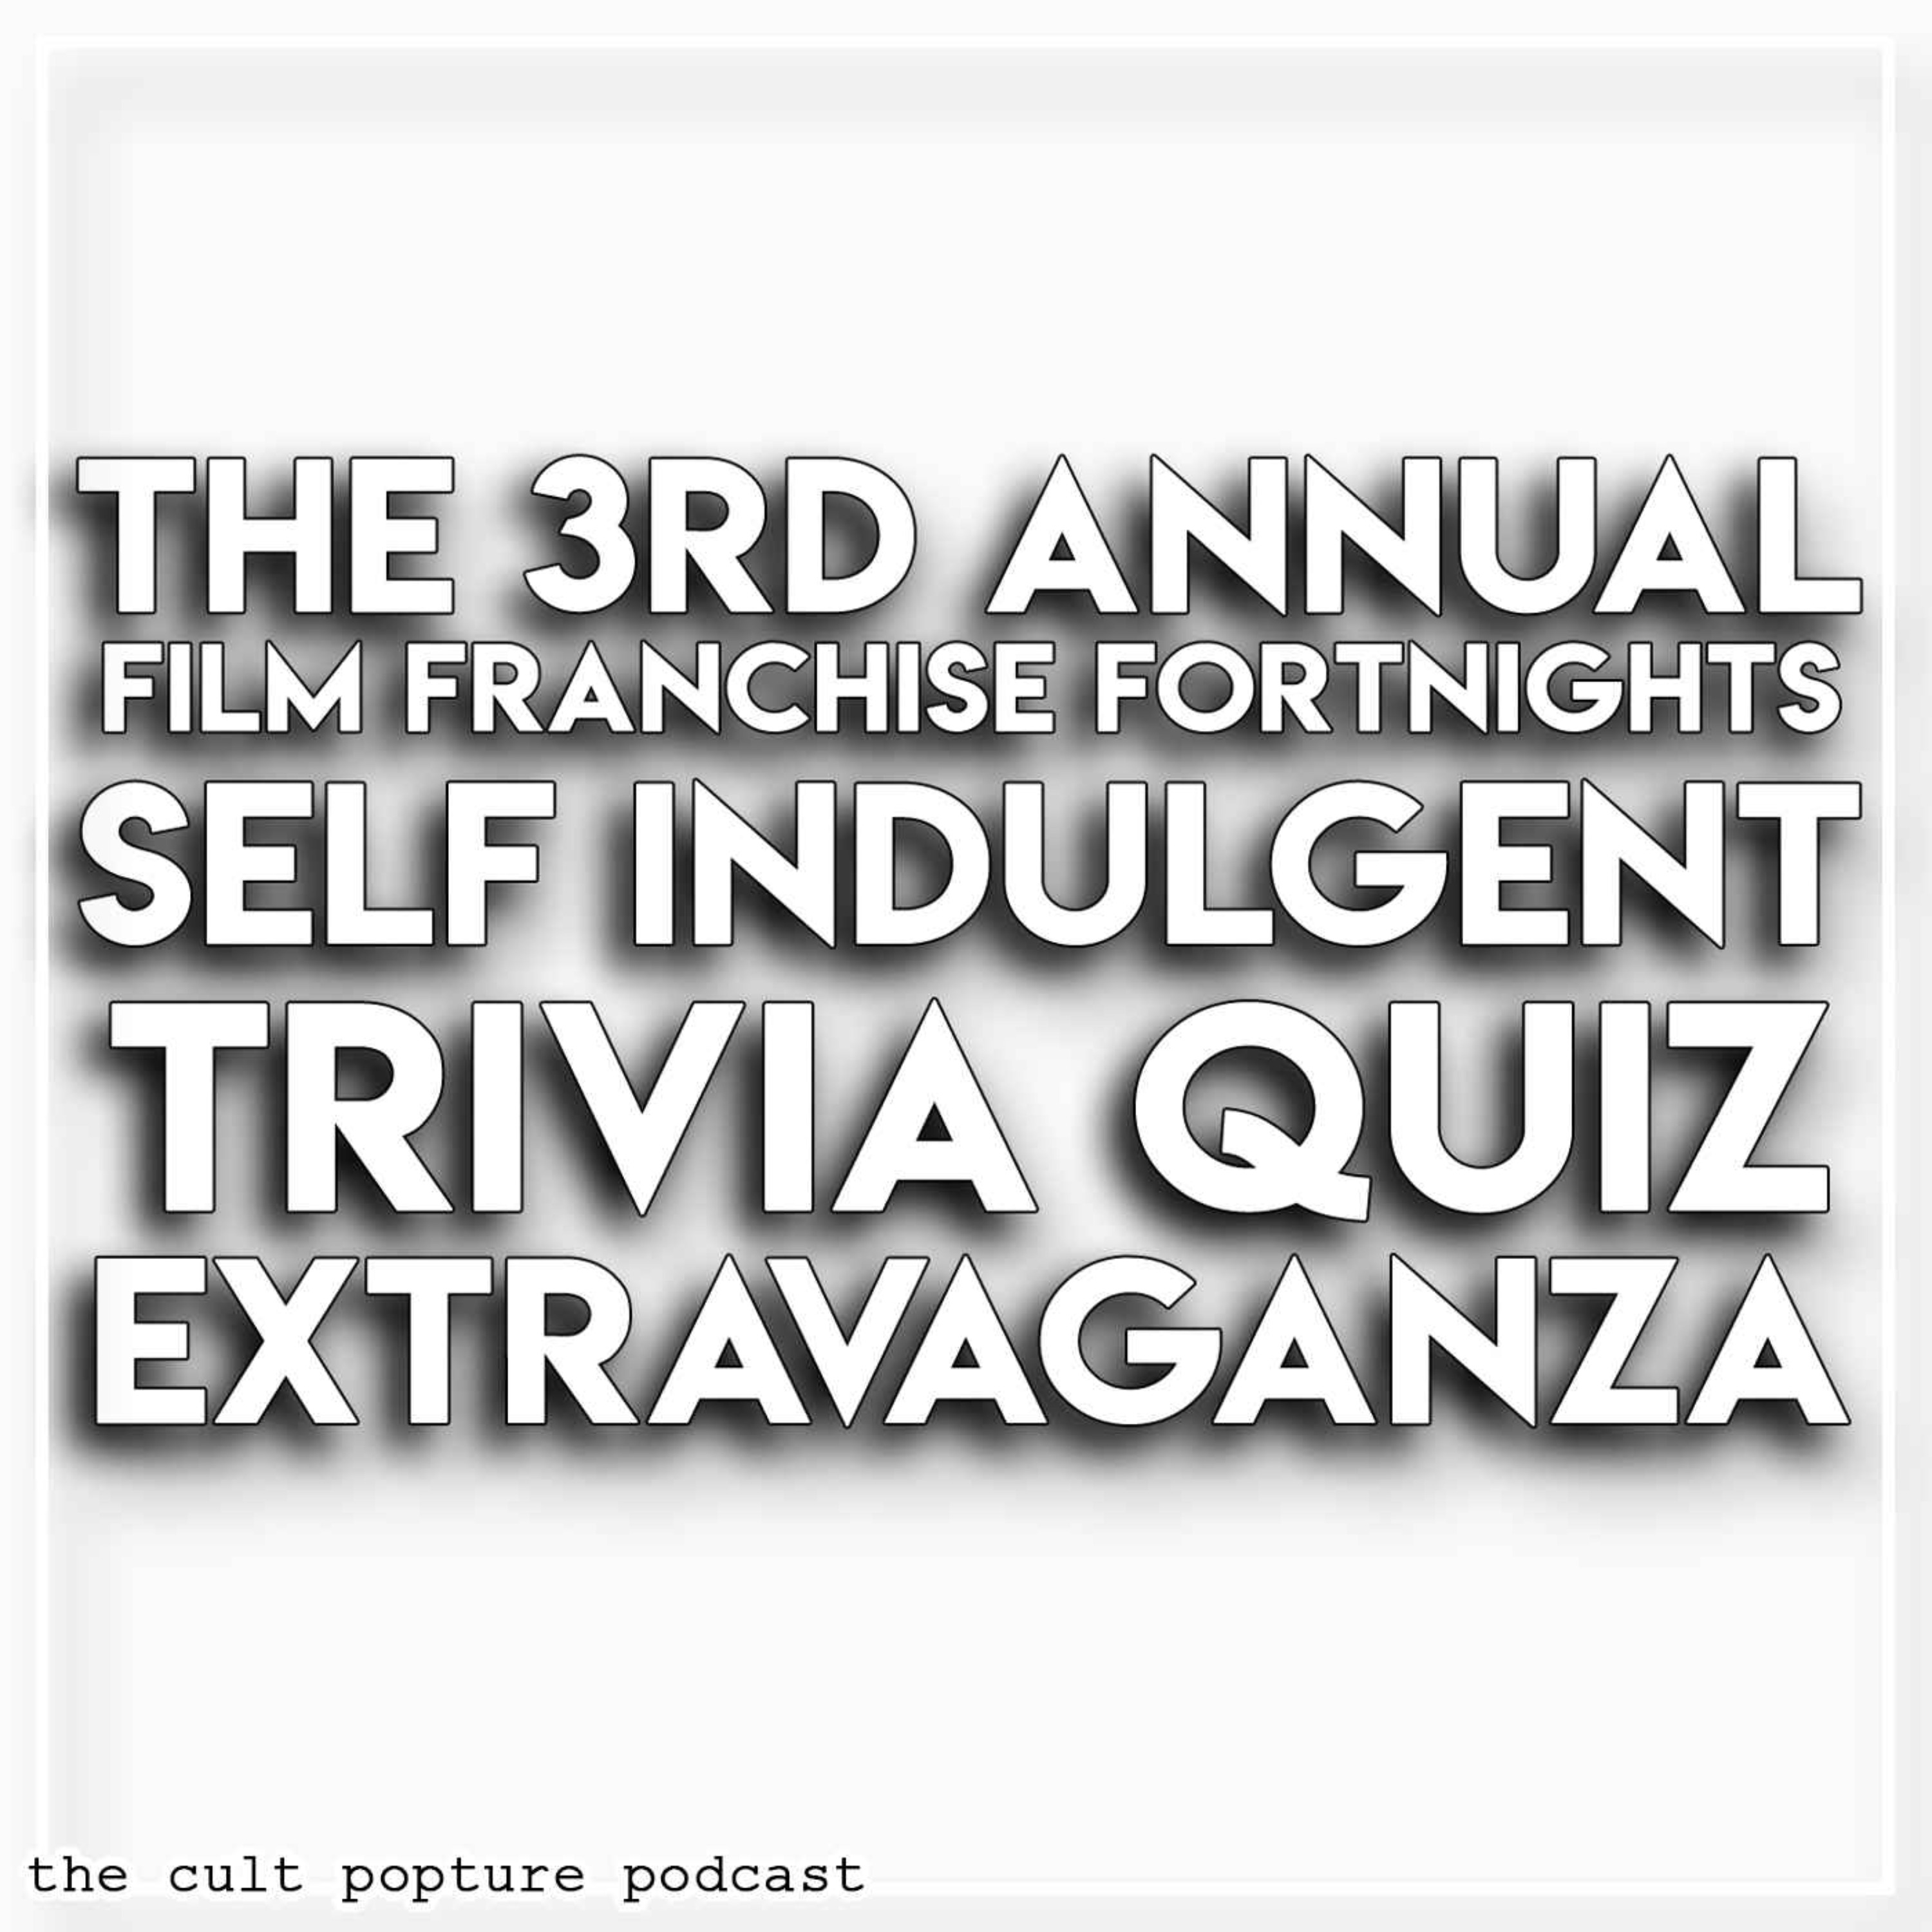 The 3rd Annual Film Franchise Fortnights Self Indulgent Trivia Quiz Extravaganza | The Cult Popture Podcast